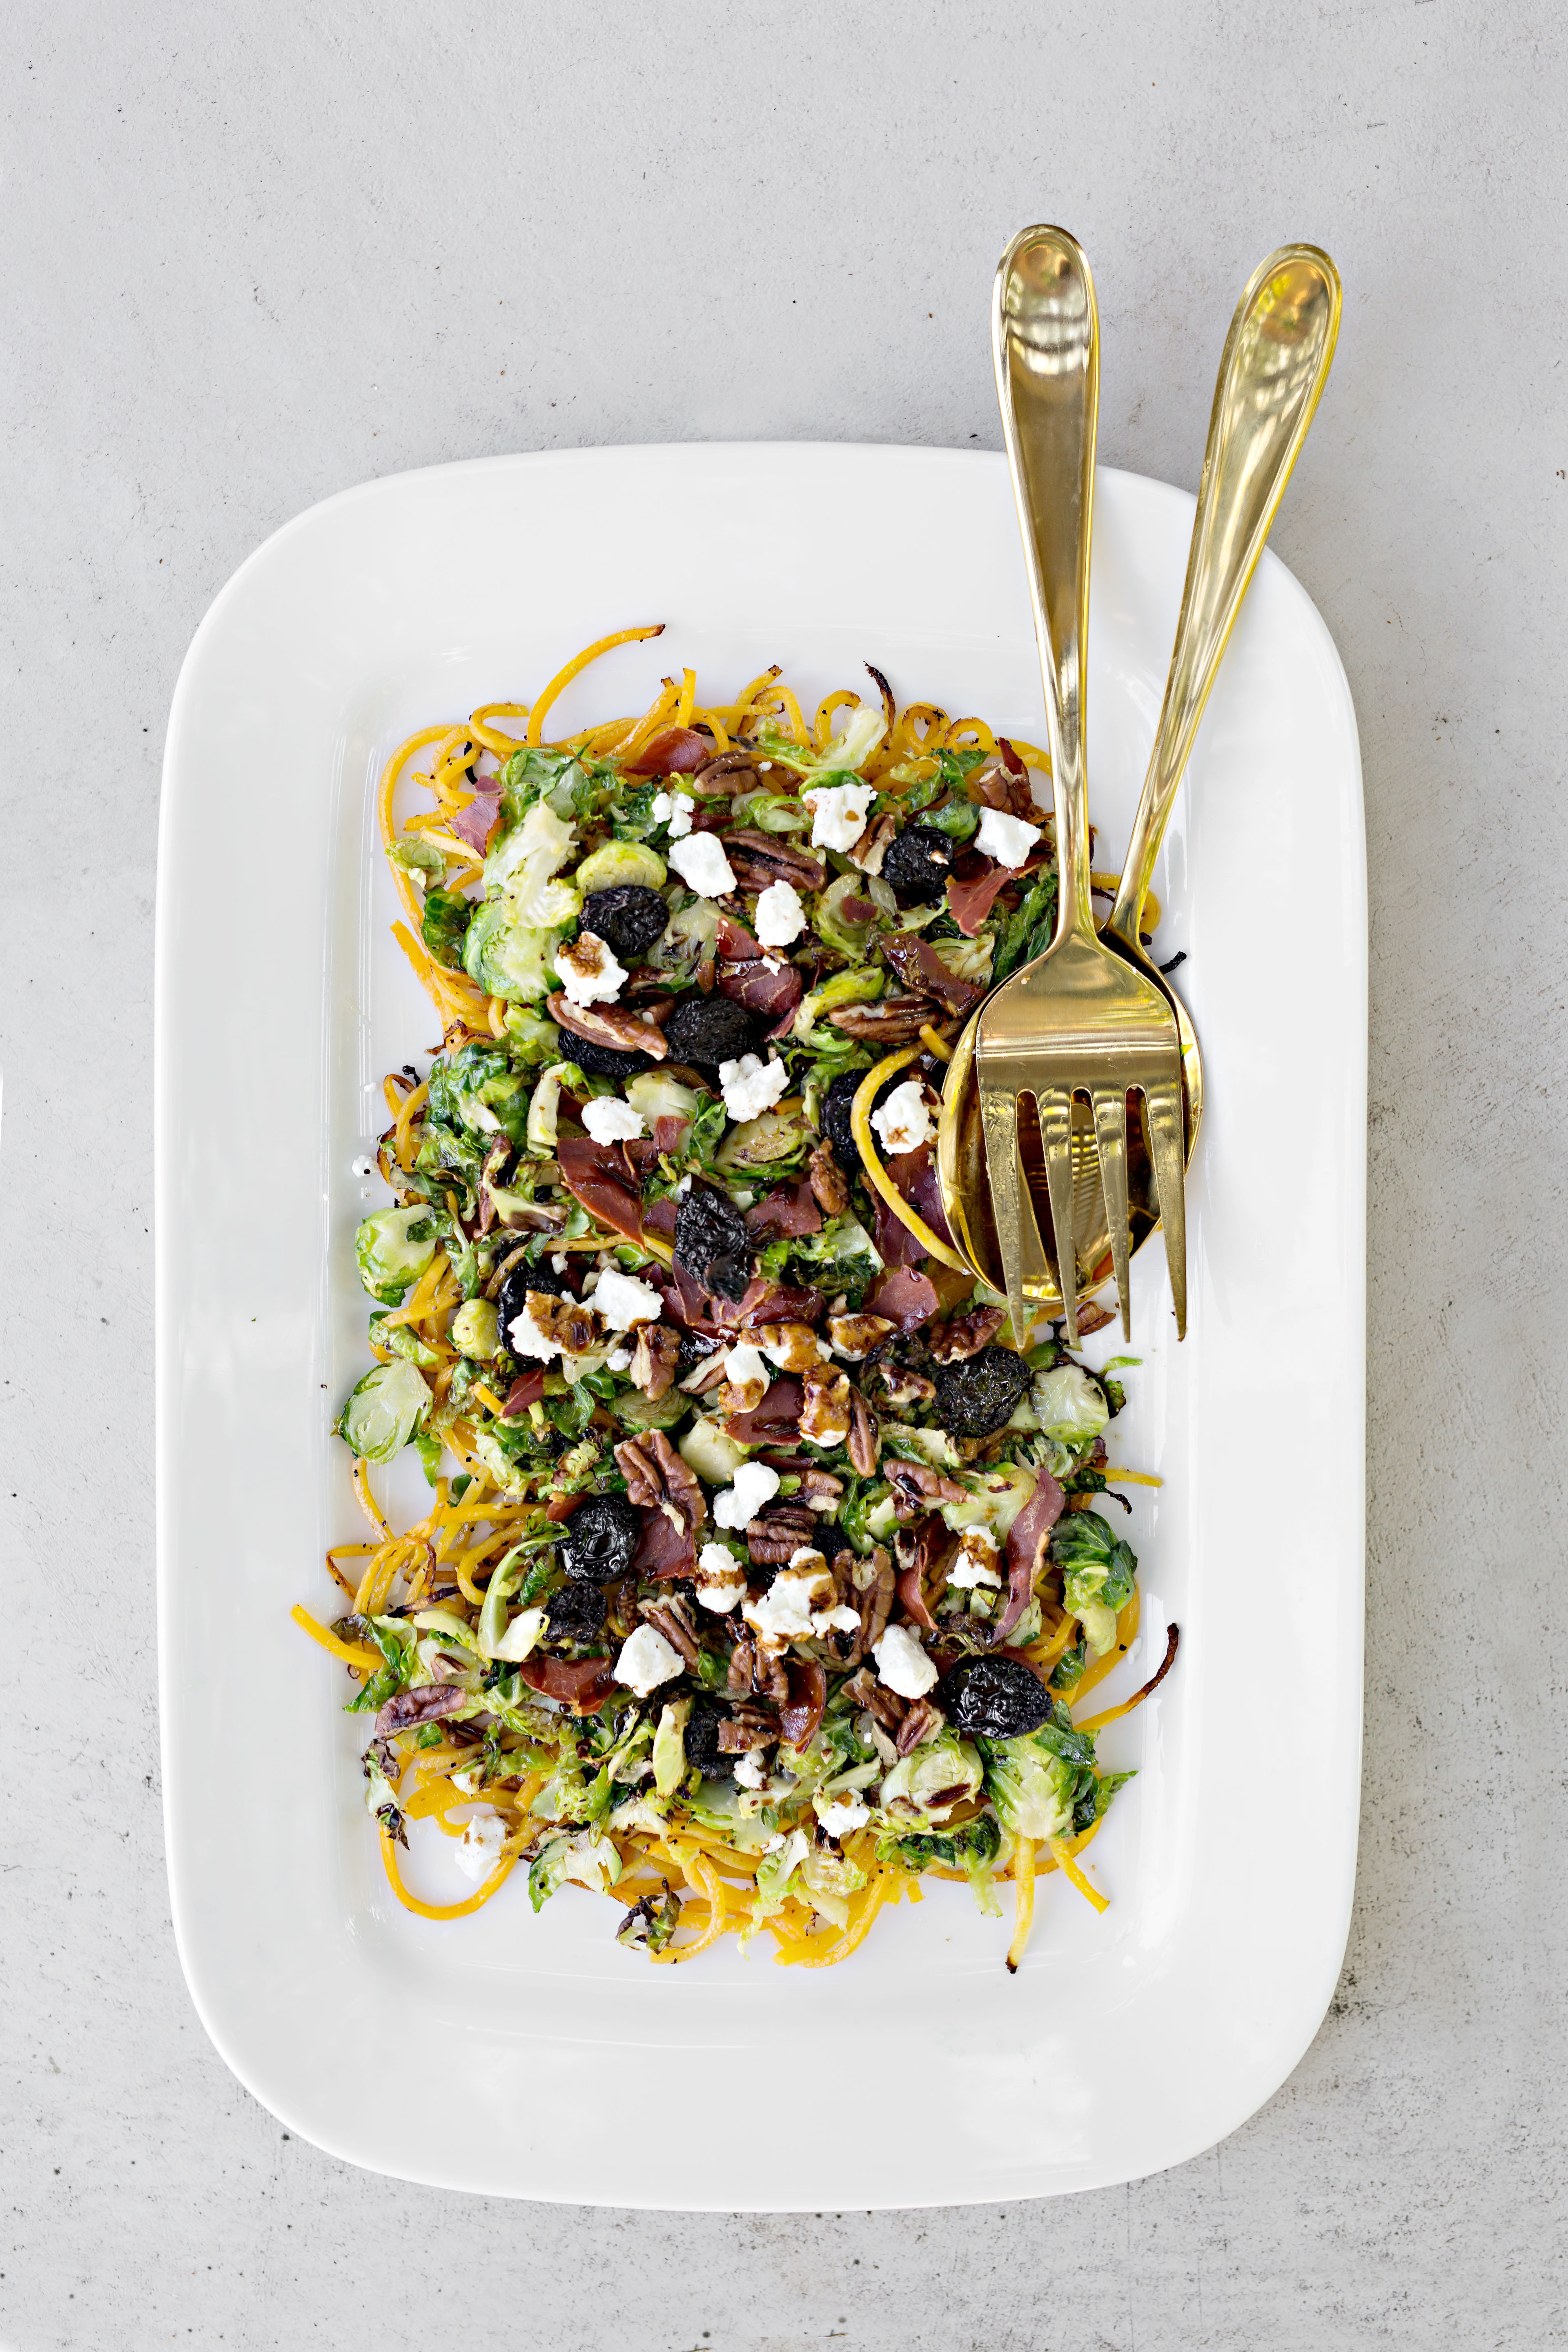 Warm Brussel Sprout and Butternut Squash Salad with Crispy Prosciutto